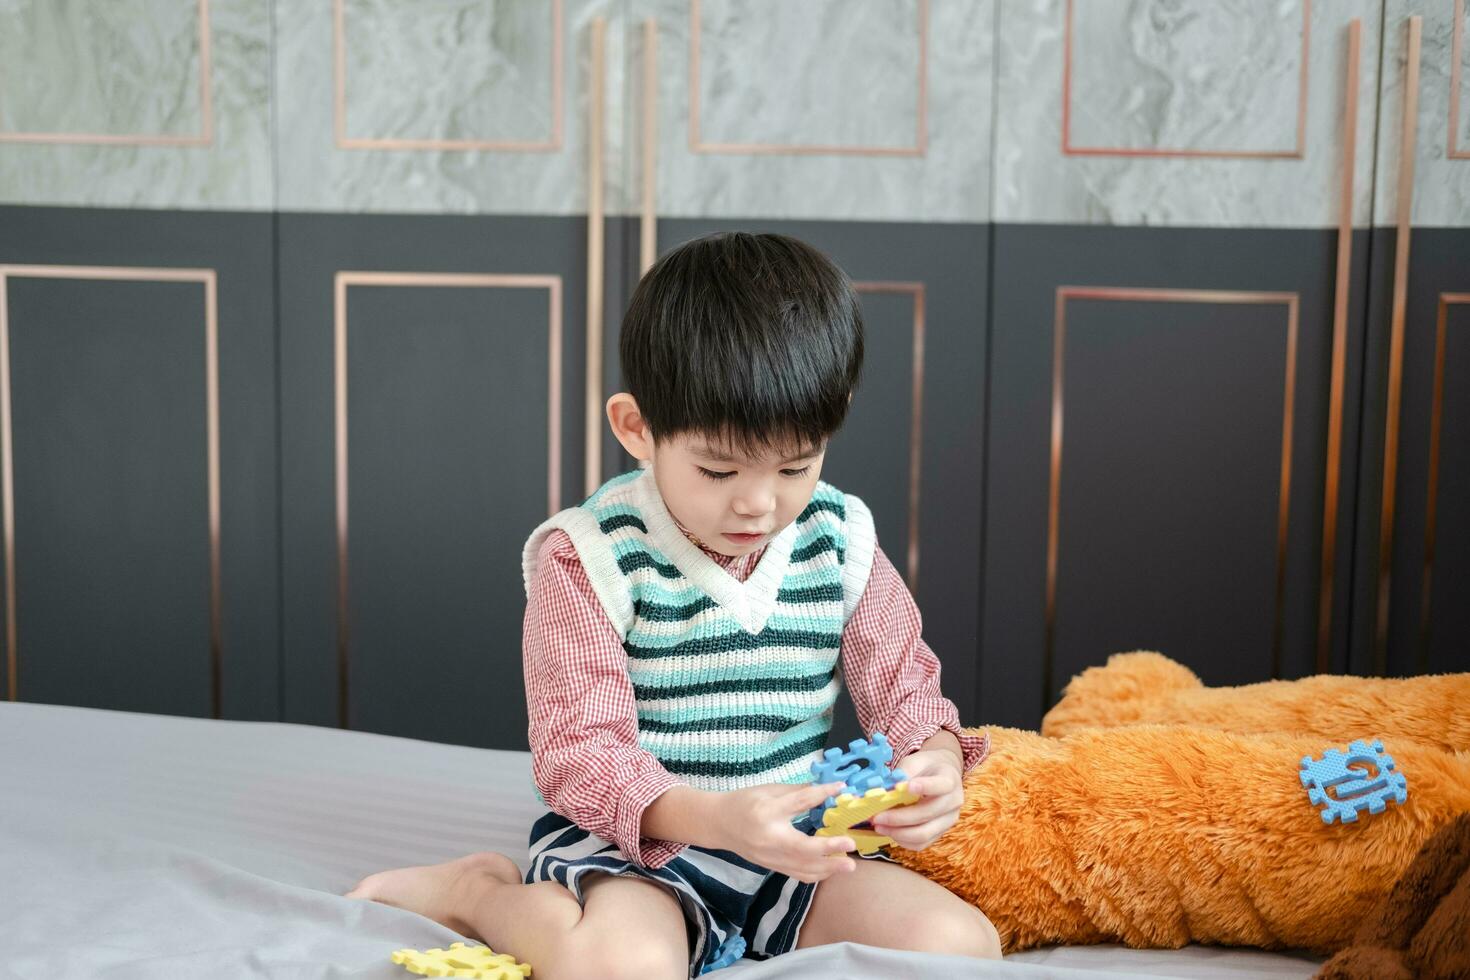 Asian boy playing with jigsaw puzzles on the bed joyfully photo